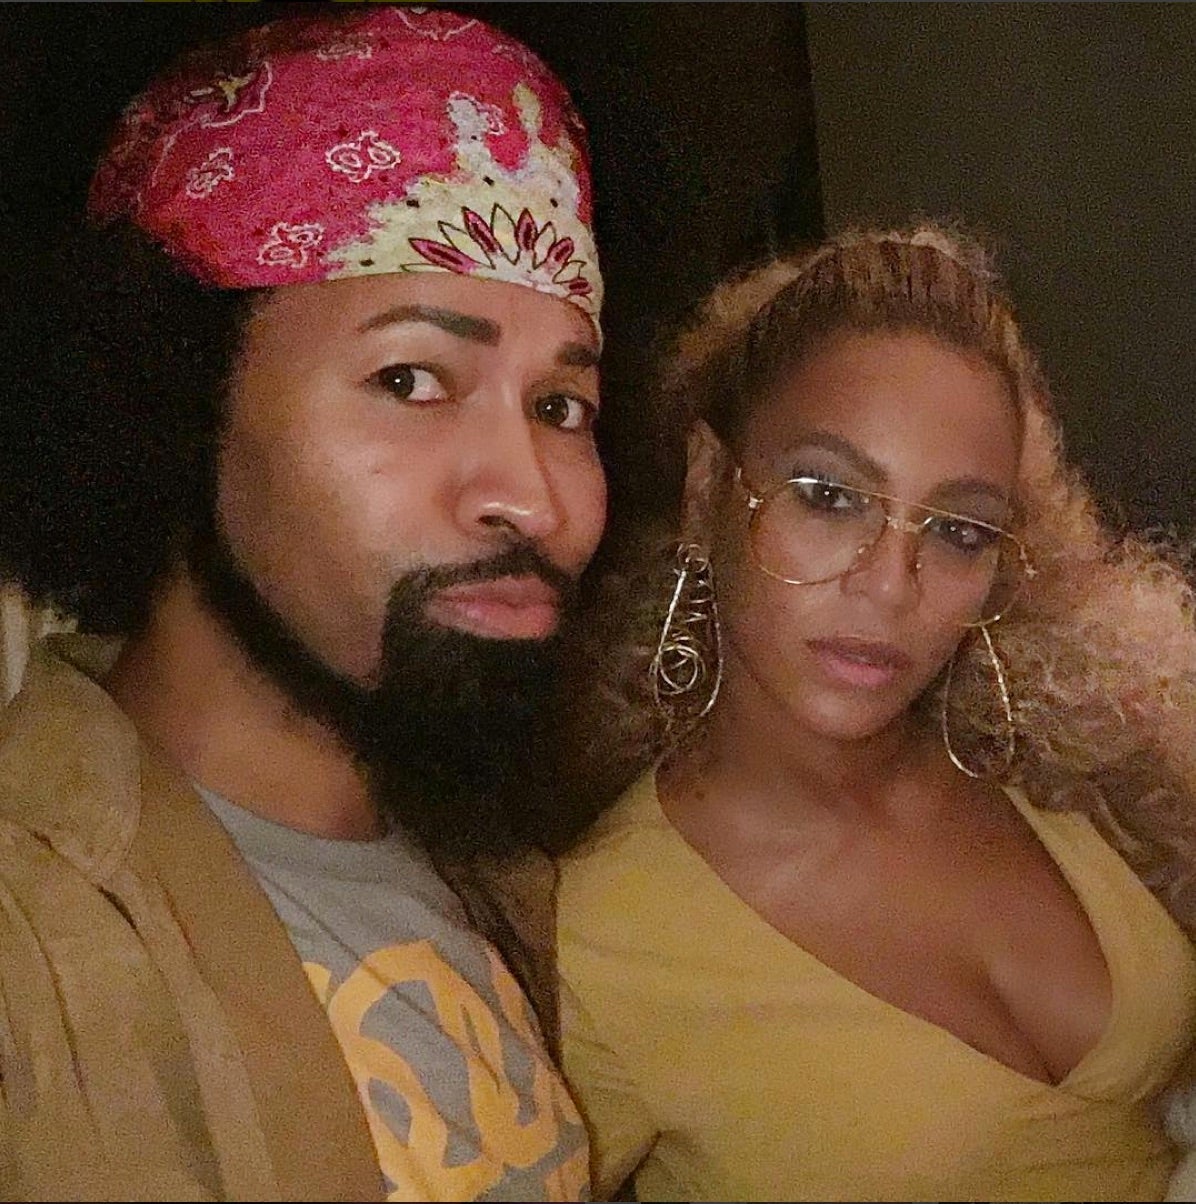 You Have to See All the Funky Fashion Moments From Beyonce's 35th Birthday Bash
